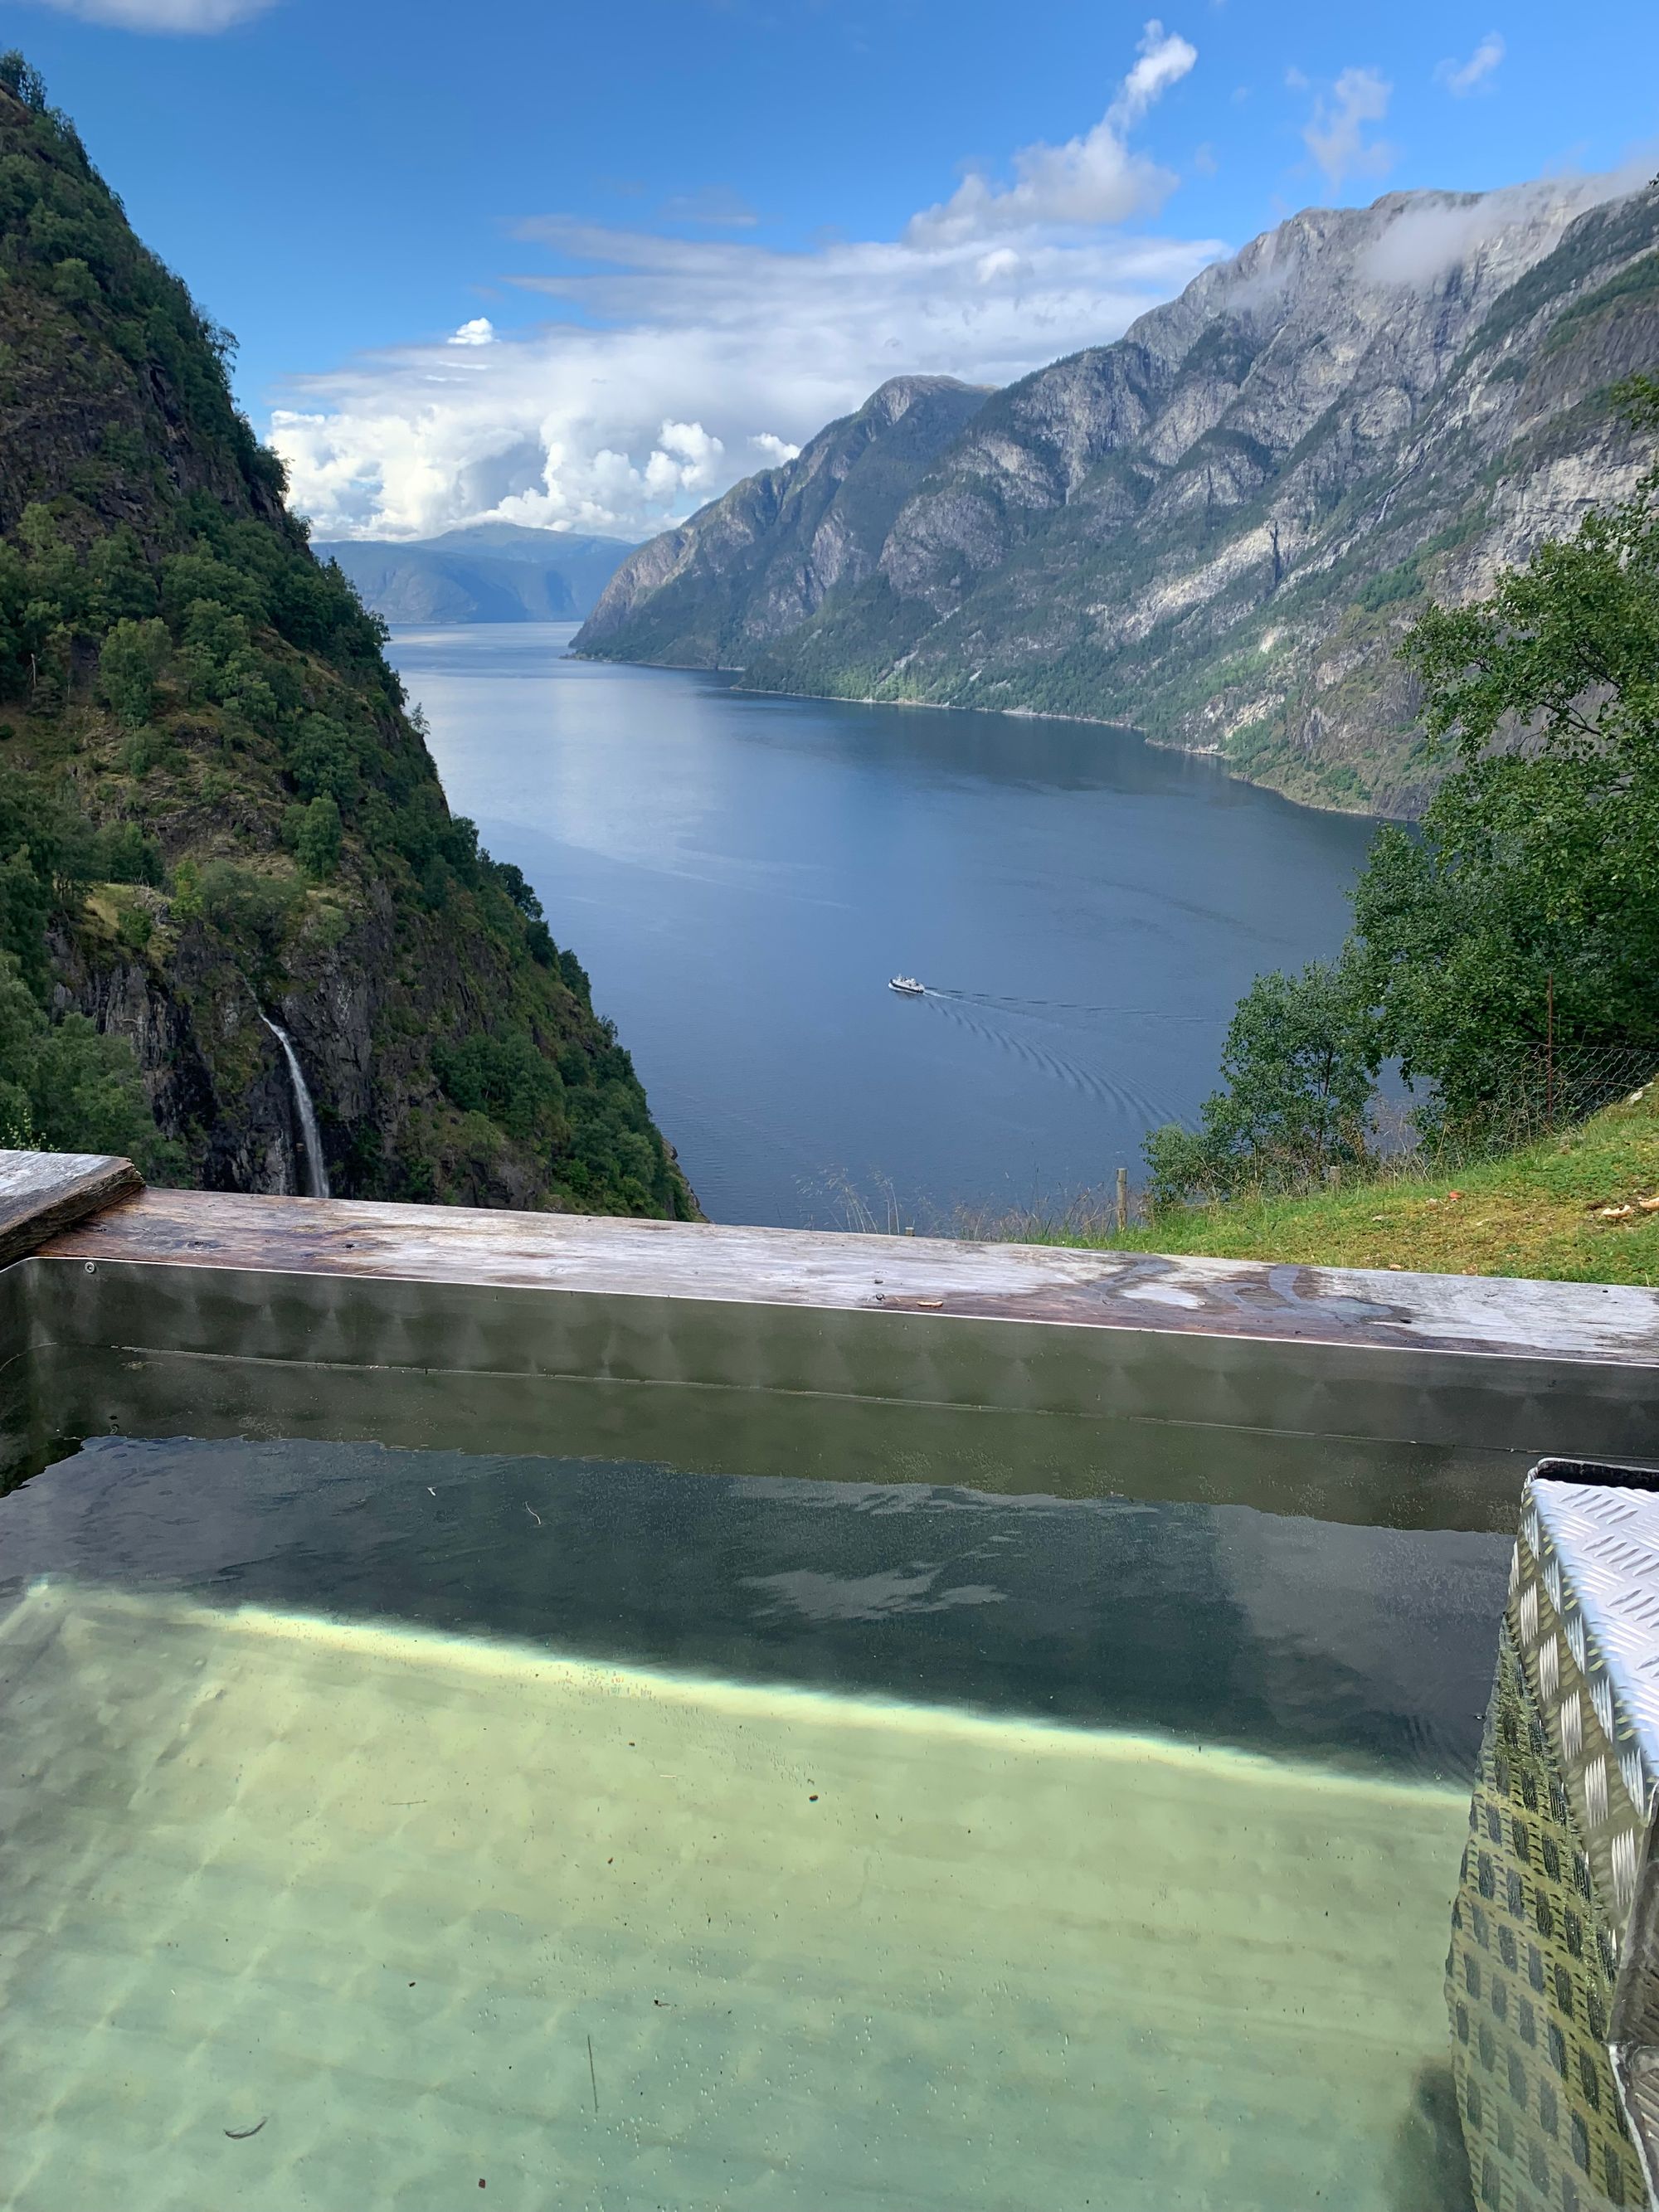 A hot tub overlooking the Norwegian fjords.